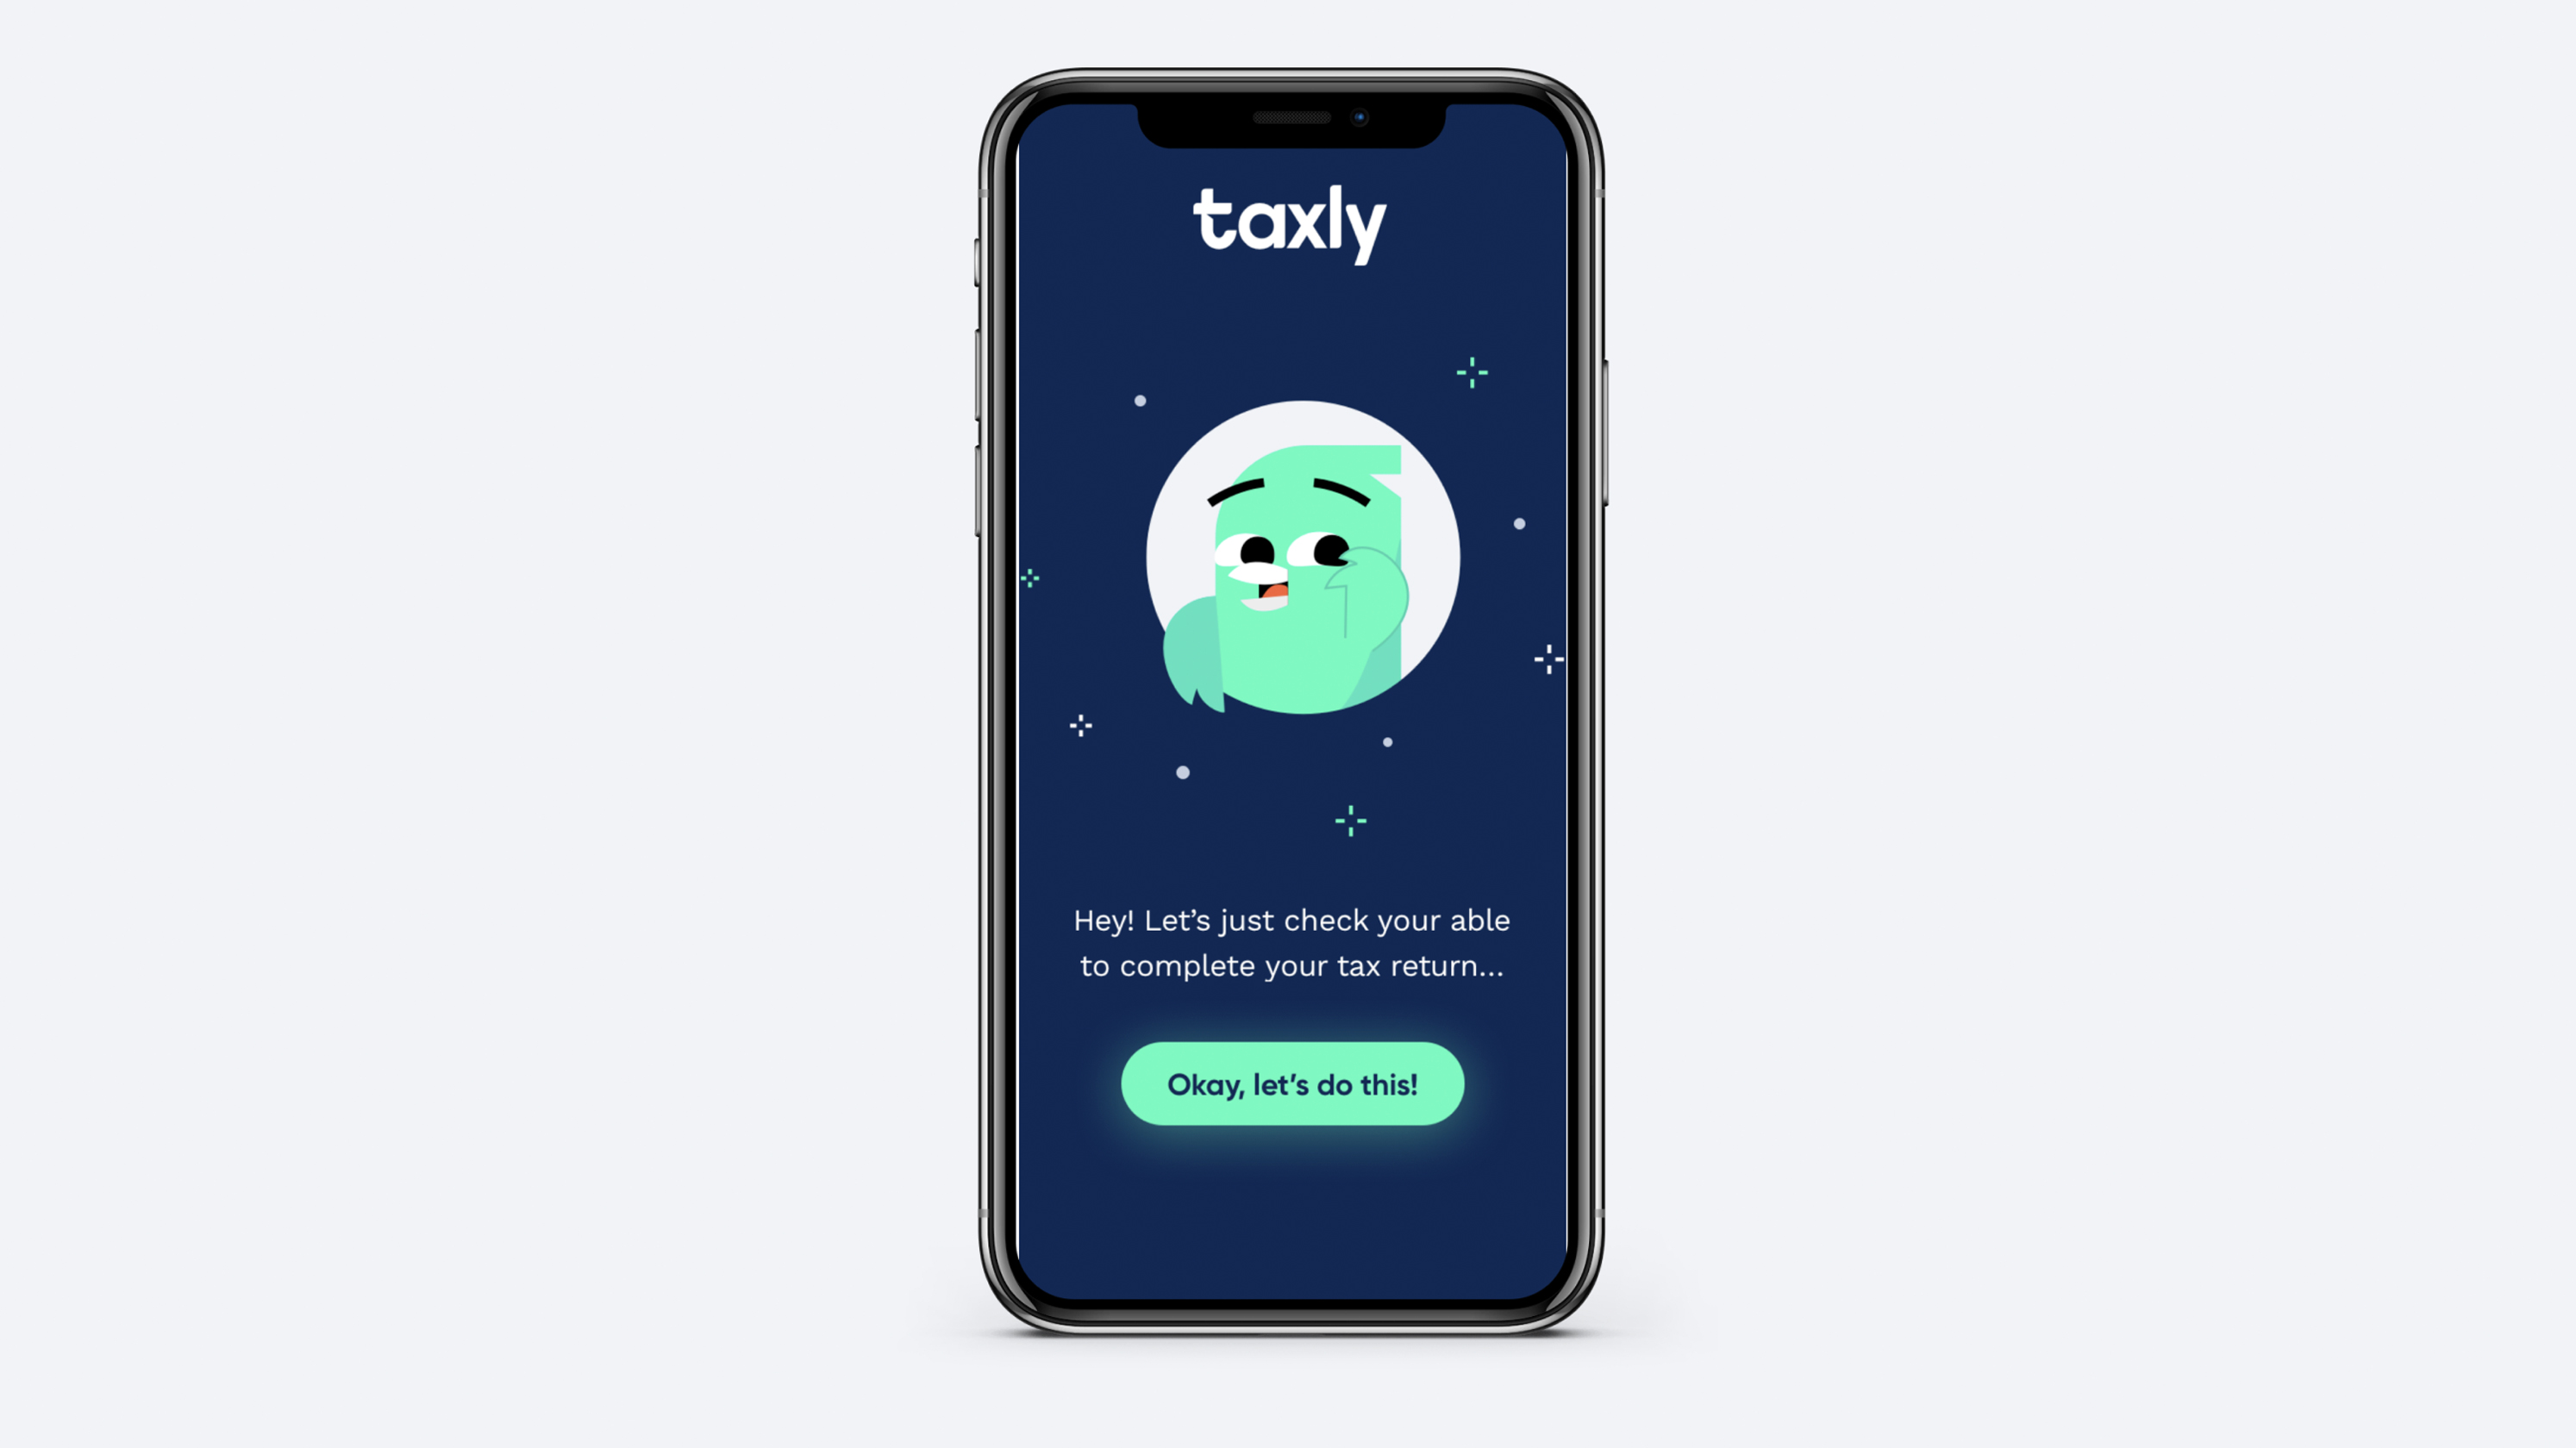 Taxly's AI bot helps customers submit their tax returns in less than 10 minutes